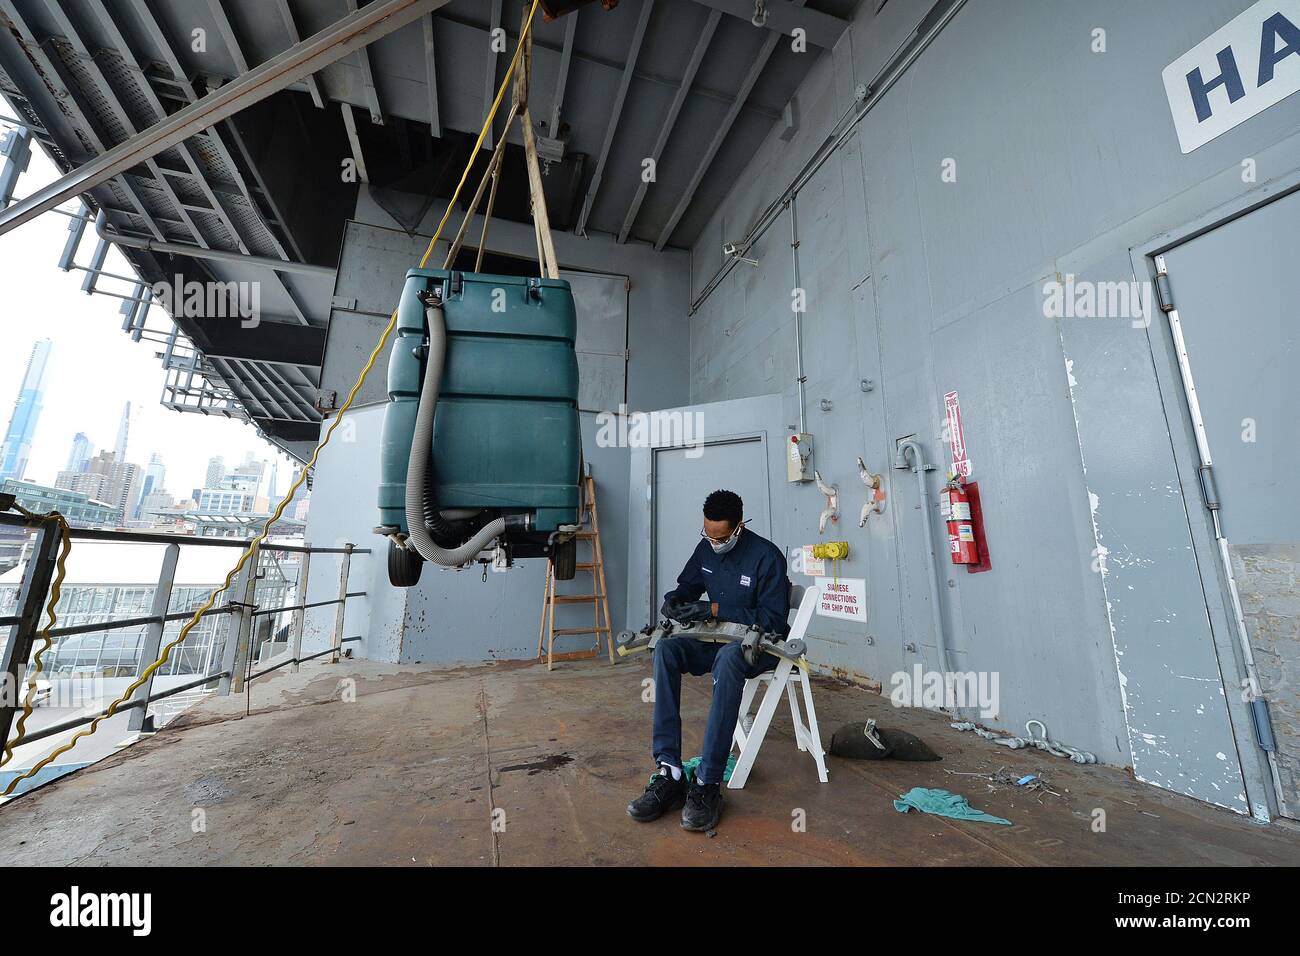 Intrepid Maintenance crew member Jason Gallant works on repairing a floor scrubber on the lower deck of the Intrepid Sea, Air & Space Museum scheduled to reopen (September 25) to the public, in New York, NY, September 17, 2020. More than 200 hand sanitizer dispensers will be set up throughout the exhibits, tickets will be time reserved, one way foot-traffic signs will help visitors navigate the exhibitions which will be cleaned and disinfected every hour; access to the Concord, submarine and food services will remain closed. (Anthony Behar/Sipa USA) Stock Photo